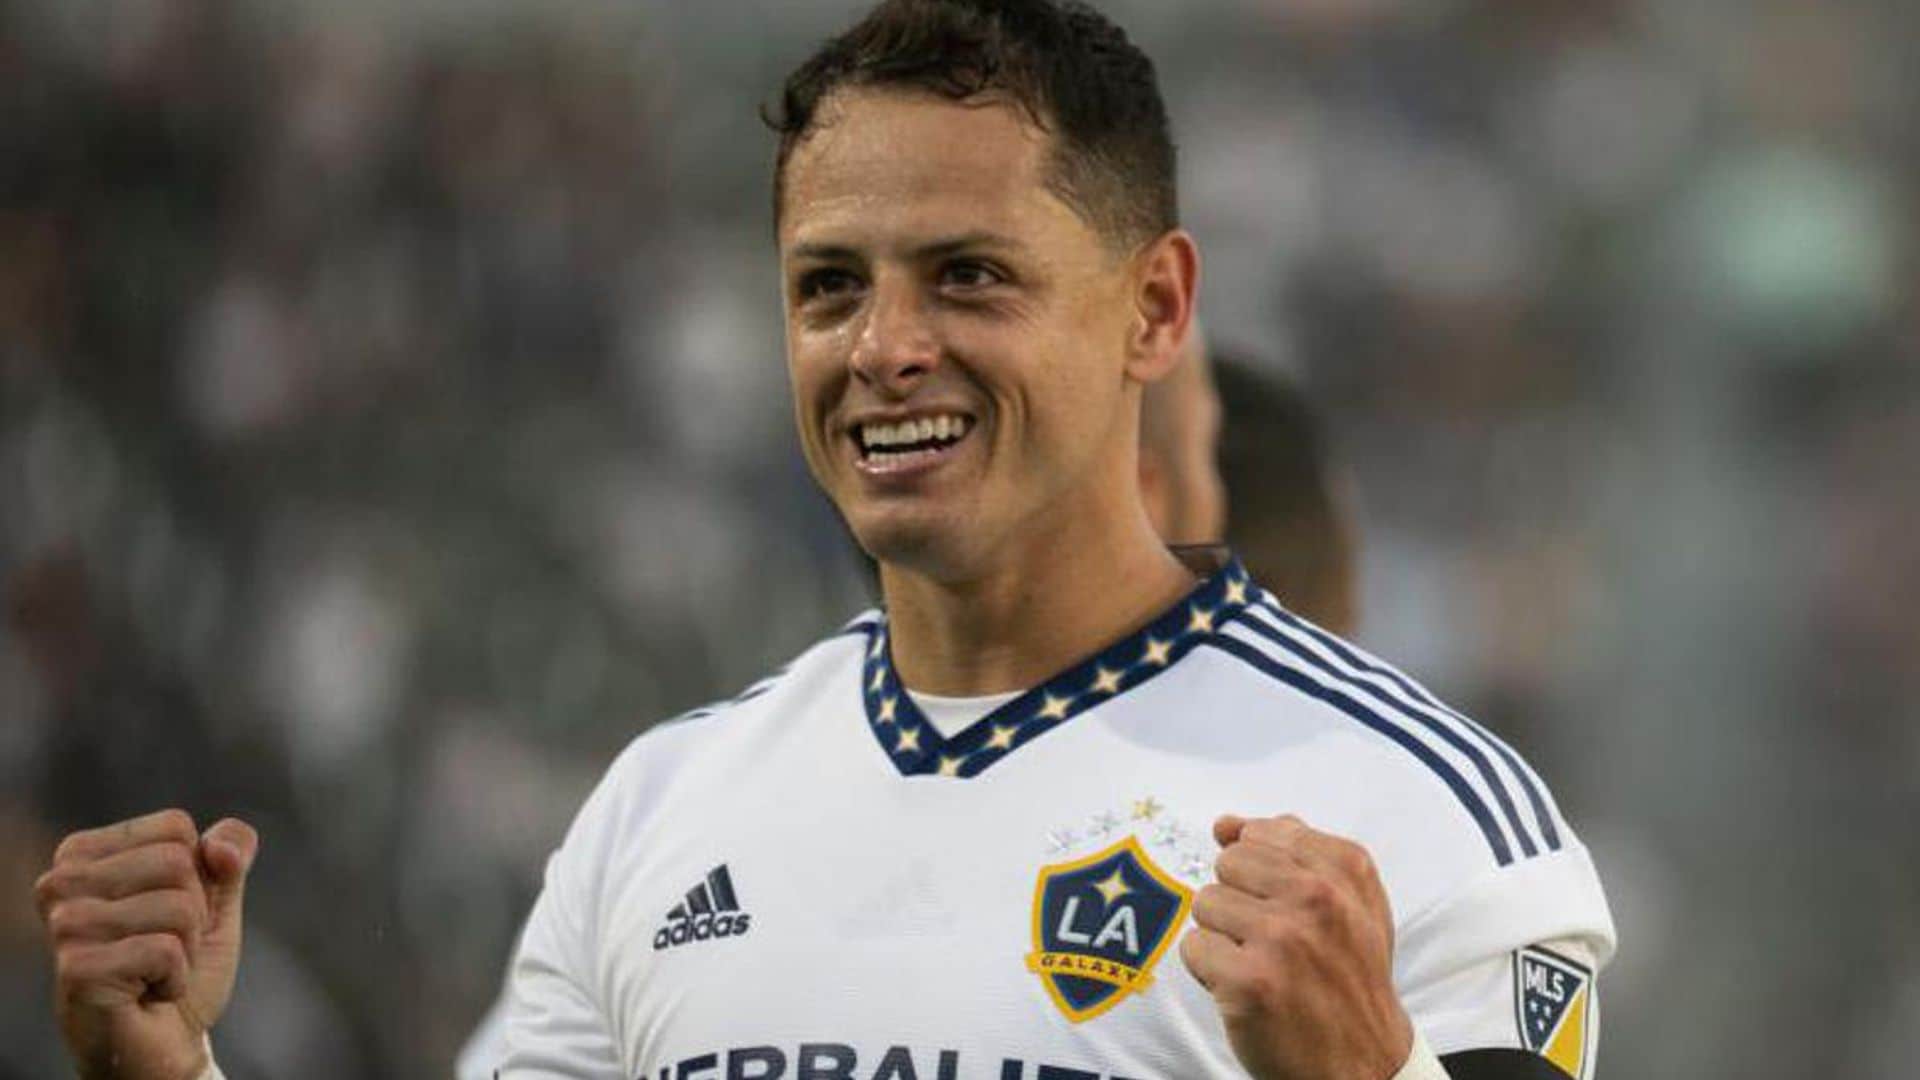 Chicharito Hernández to rejoin Chivas, his childhood soccer club